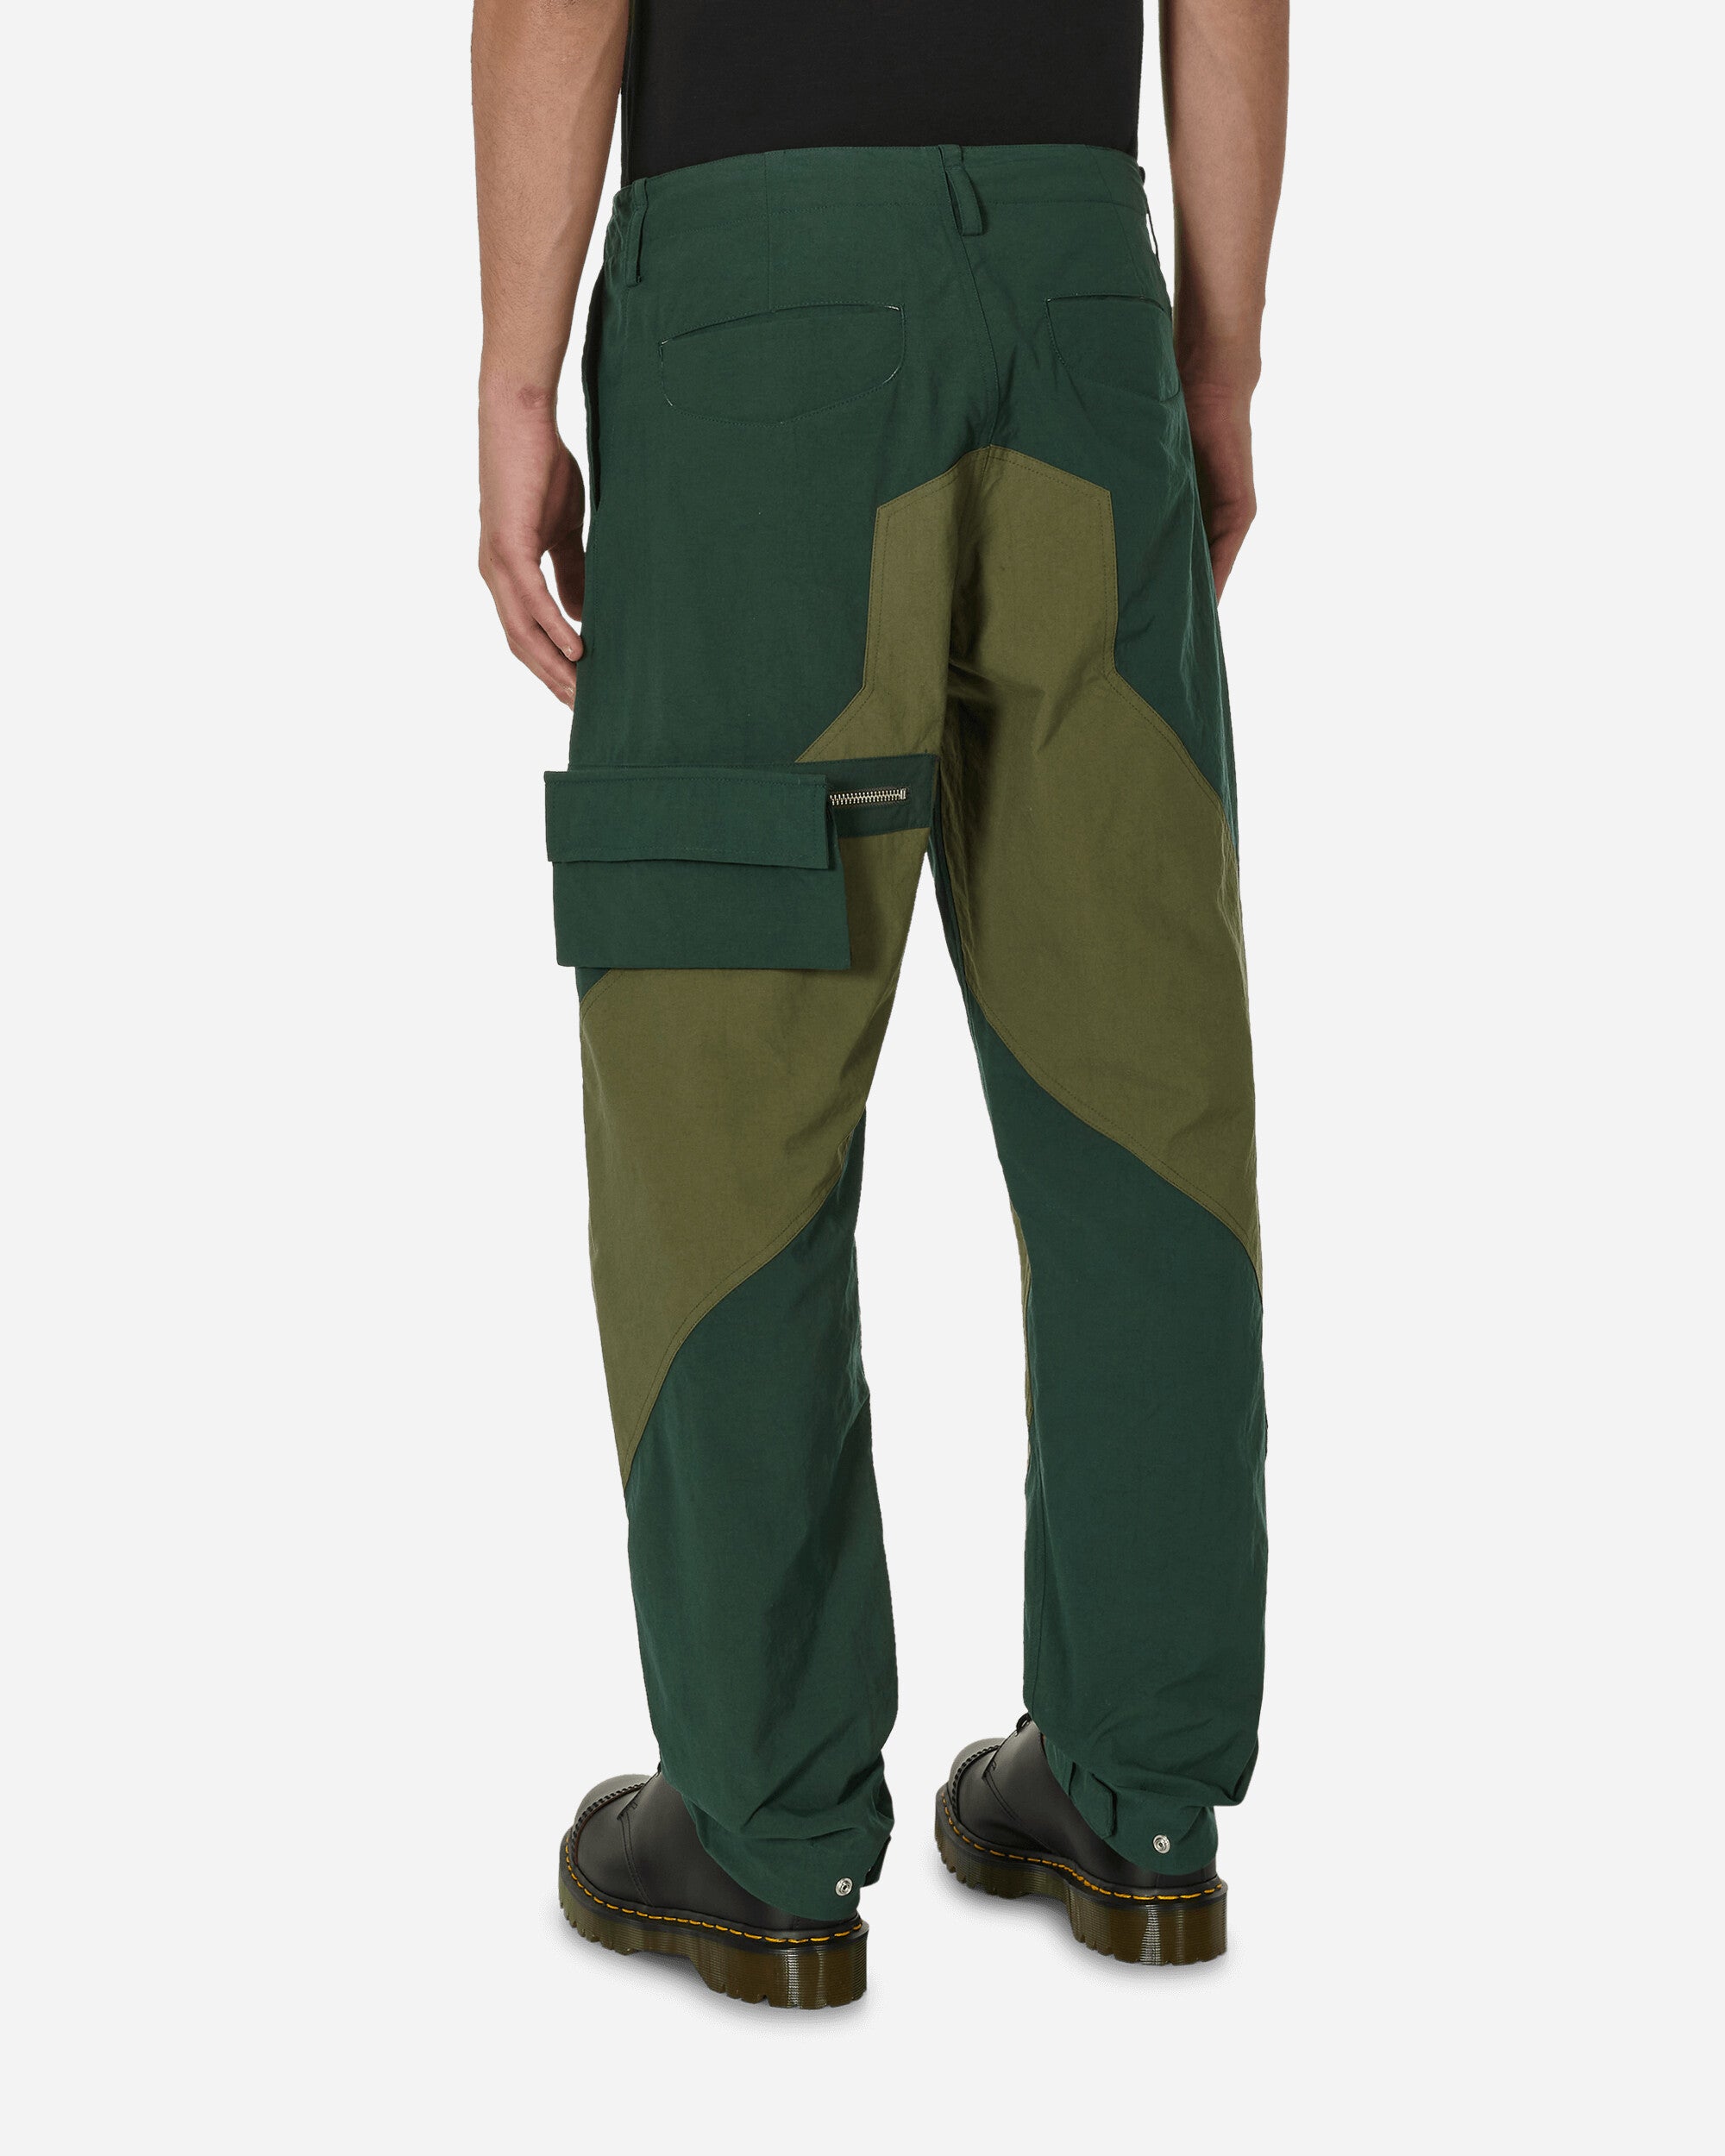 Phingerin Moving Diagonal Pants Green/Olive Pants Trousers PD-231-BT-021 A